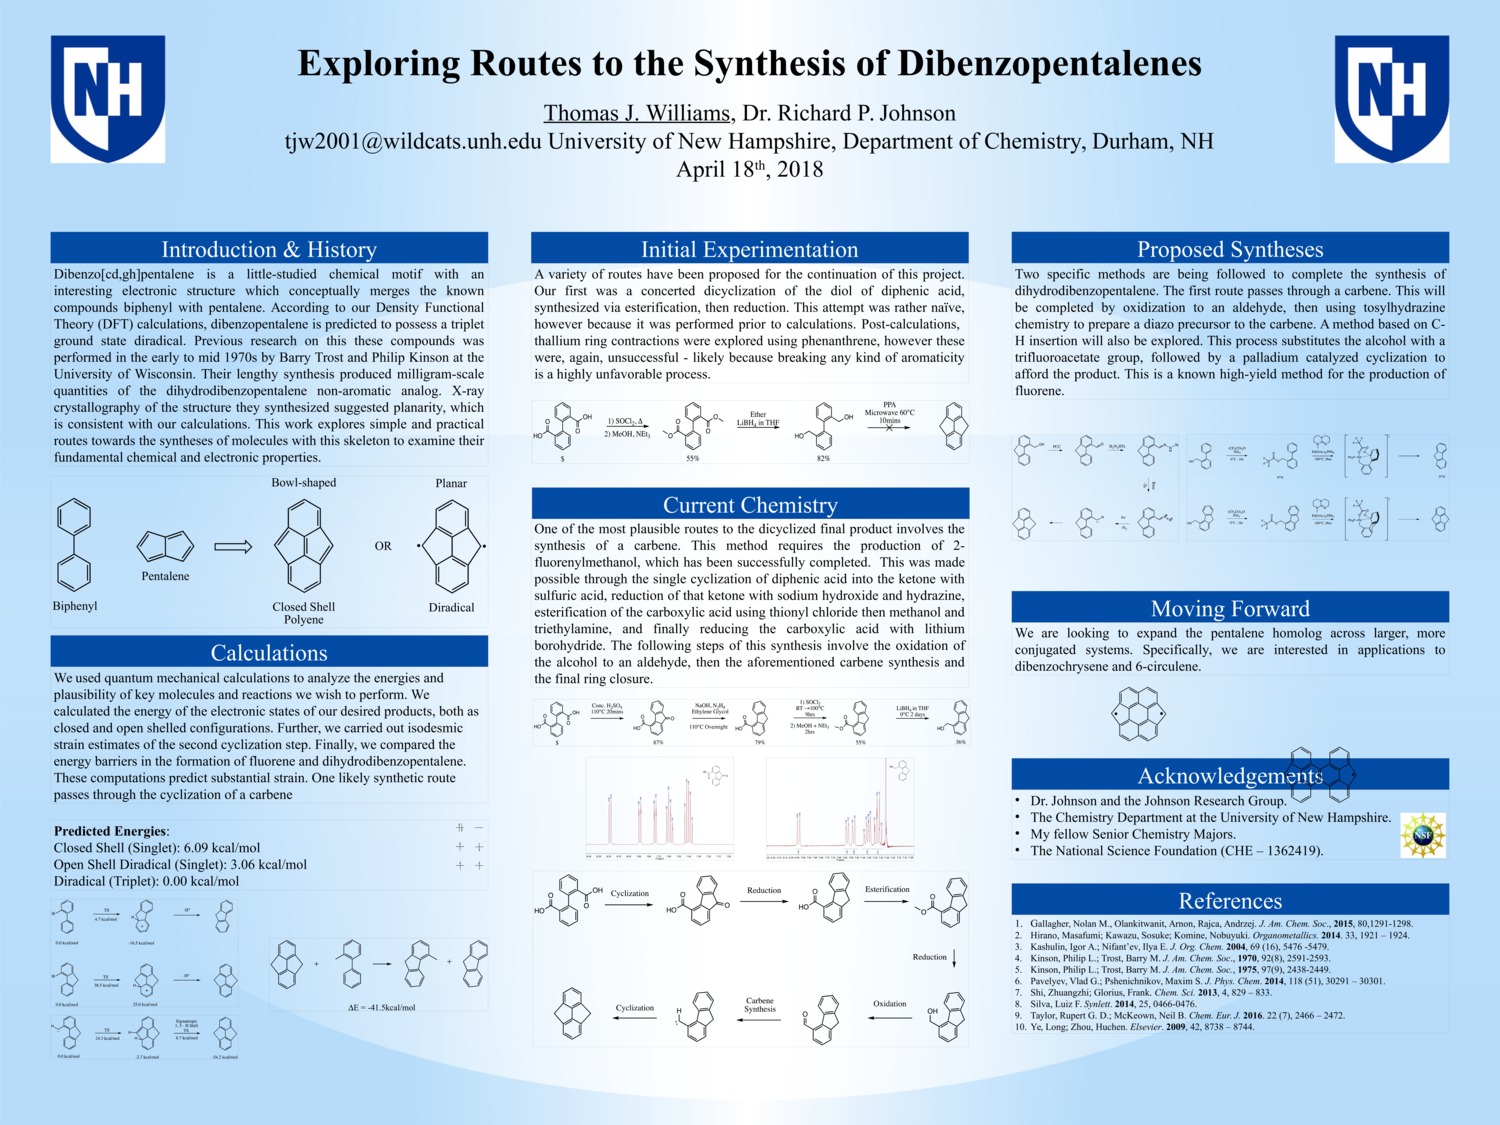 Exploring Routes To The Synthesis Of Dibenzopentalenes by tjw2001